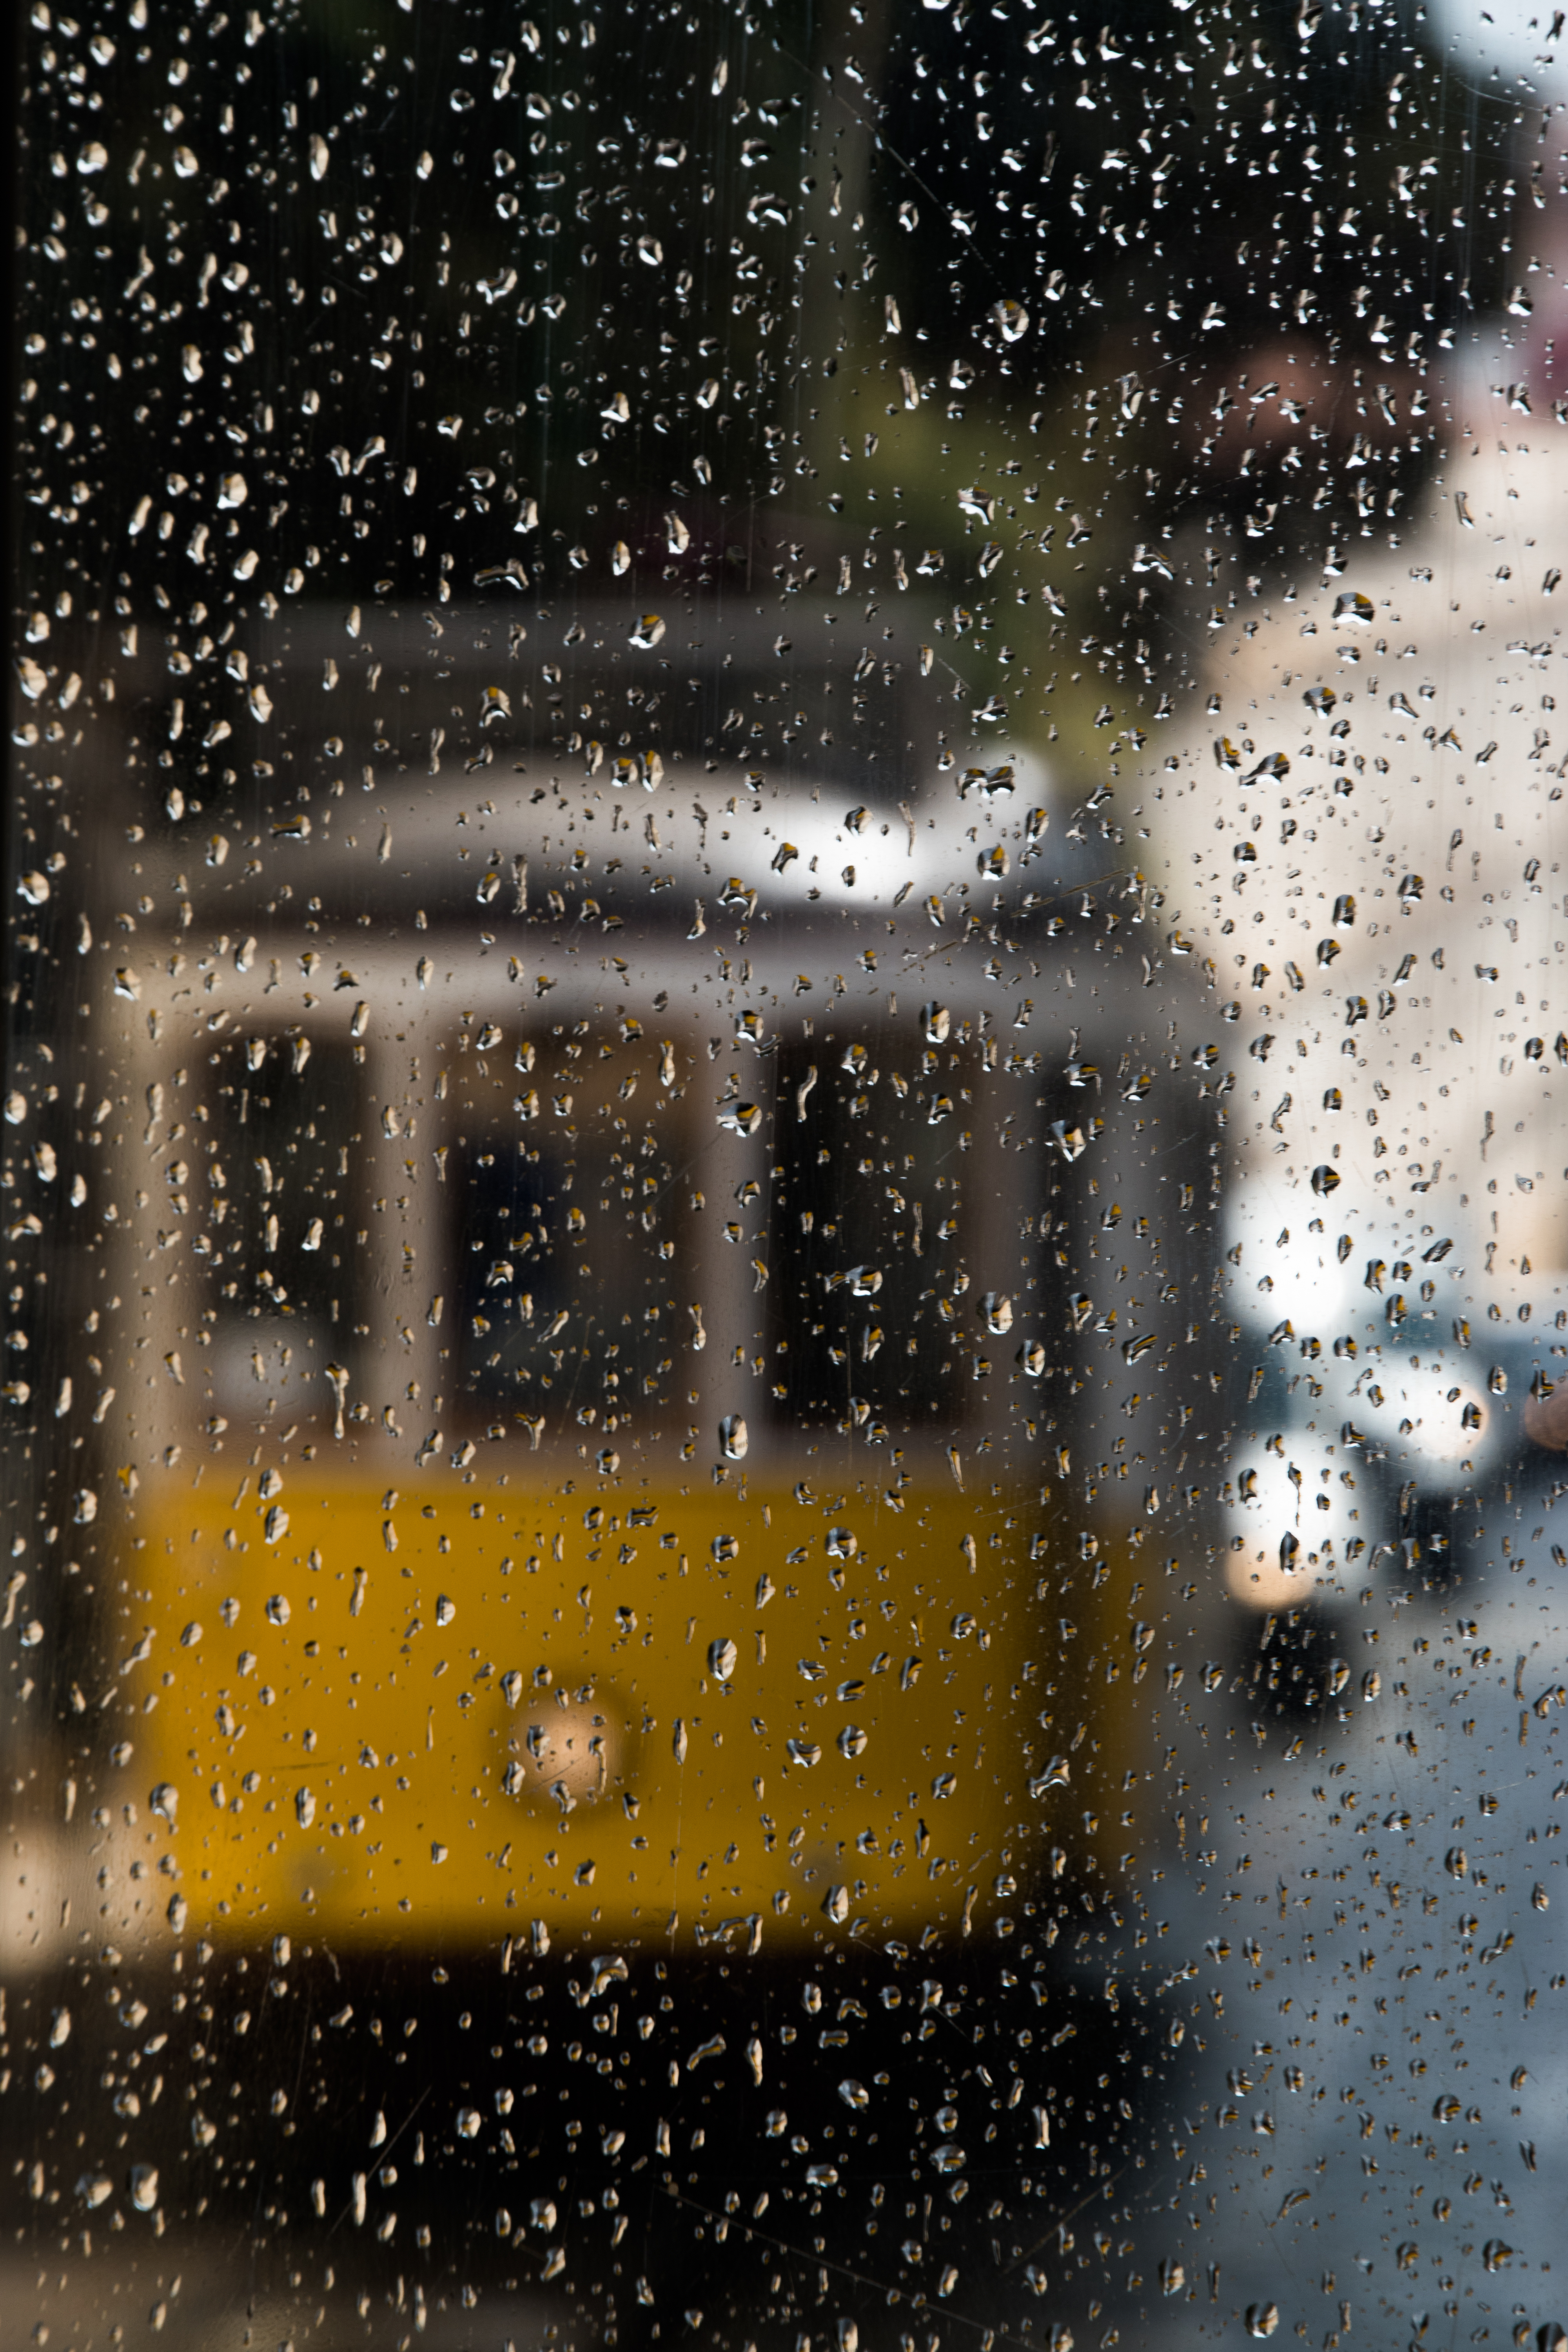 139959 download wallpaper rain, drops, transparent, macro, wet, blur, smooth, glass screensavers and pictures for free